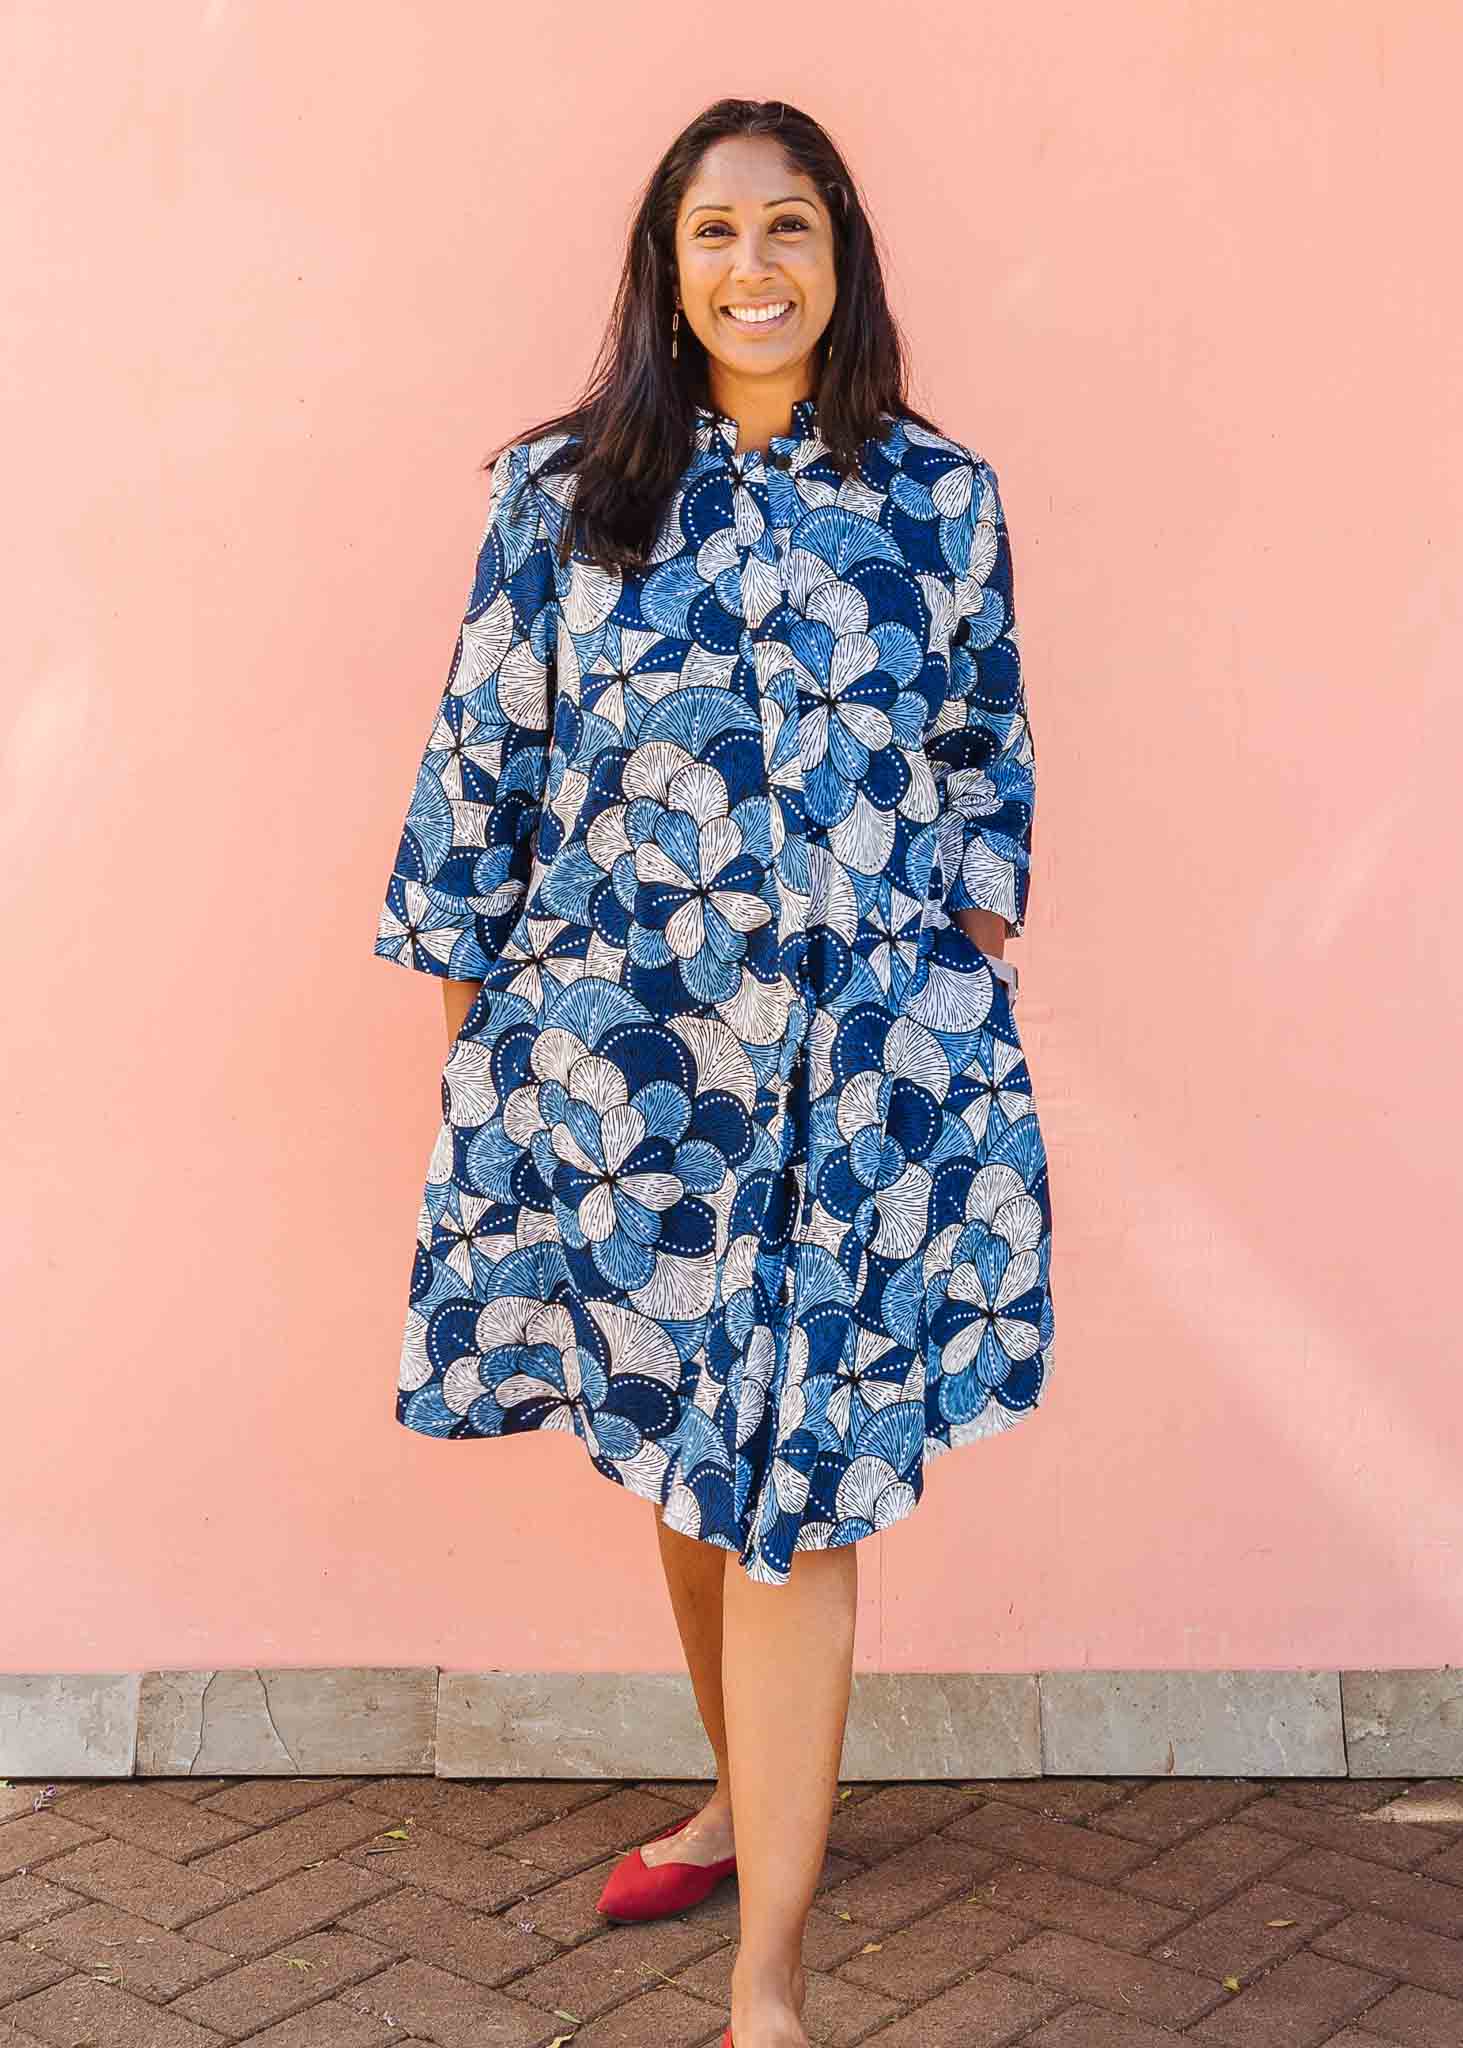 Model wearing blue and white floral print dress.